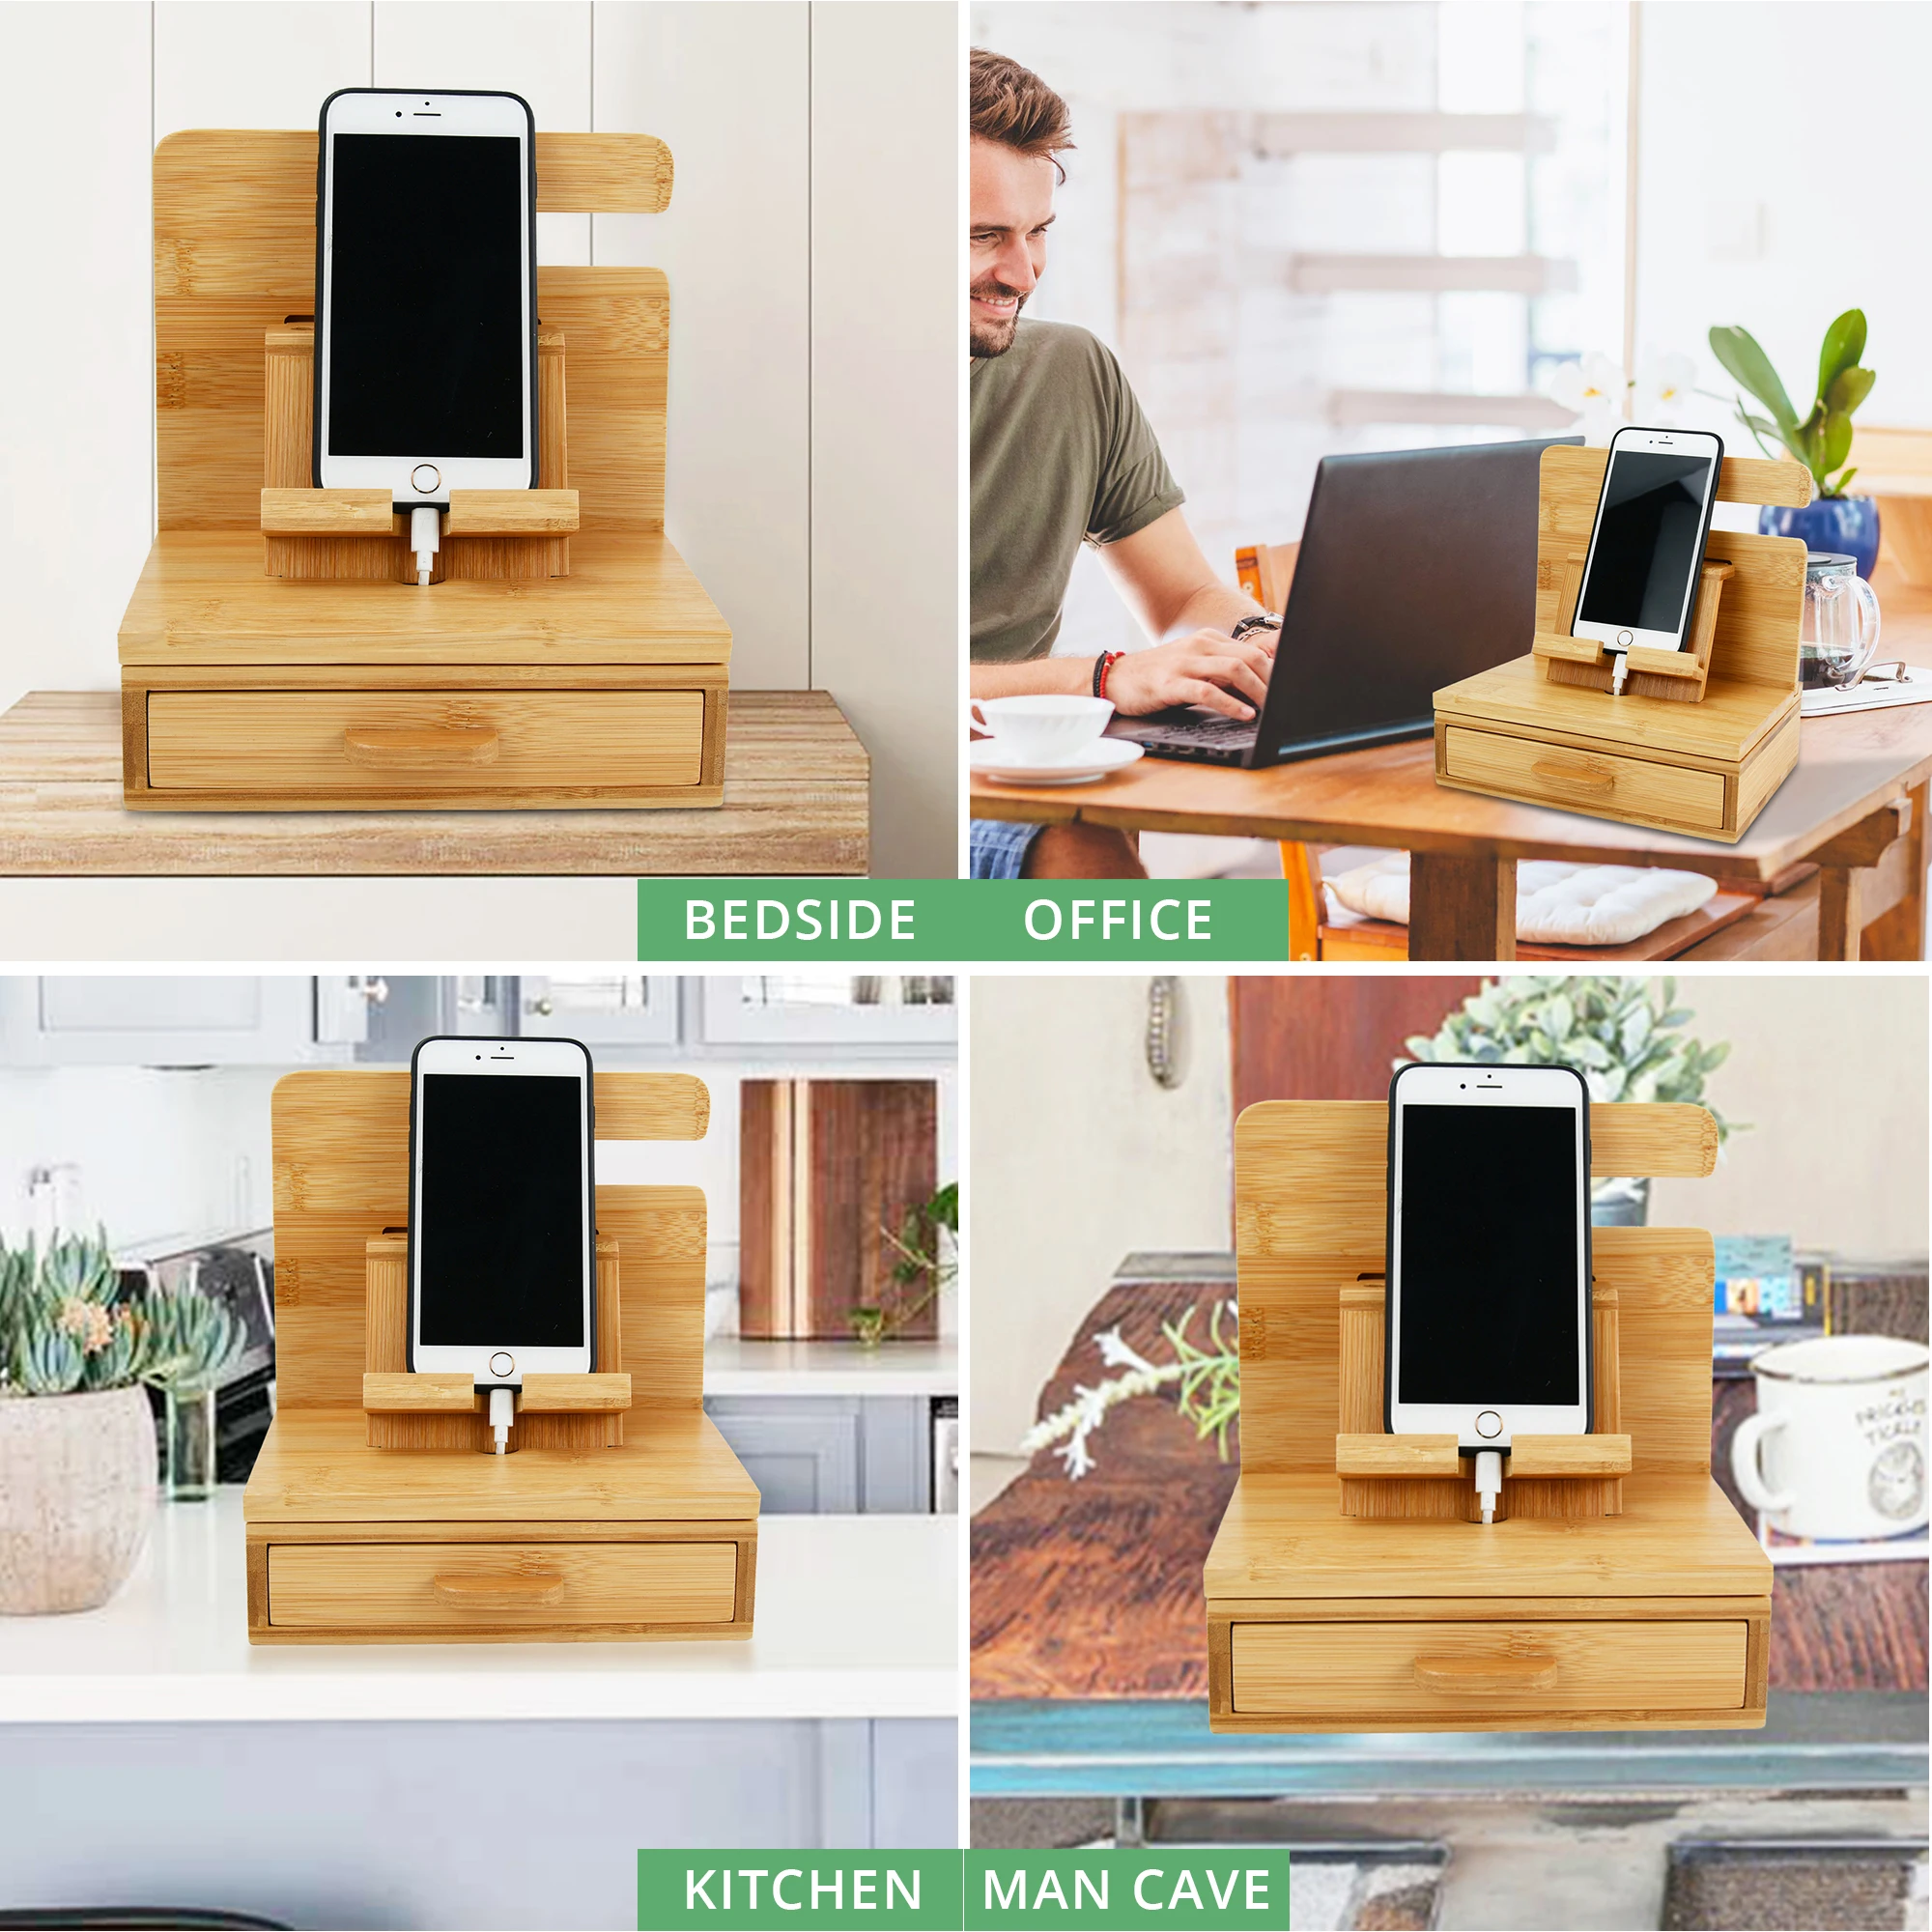 Youlike Wooden Phone Docking Station Desktop Mobile Phone,Bamboo Wood Phone Docking Handmade Station tray for Multiple Devices